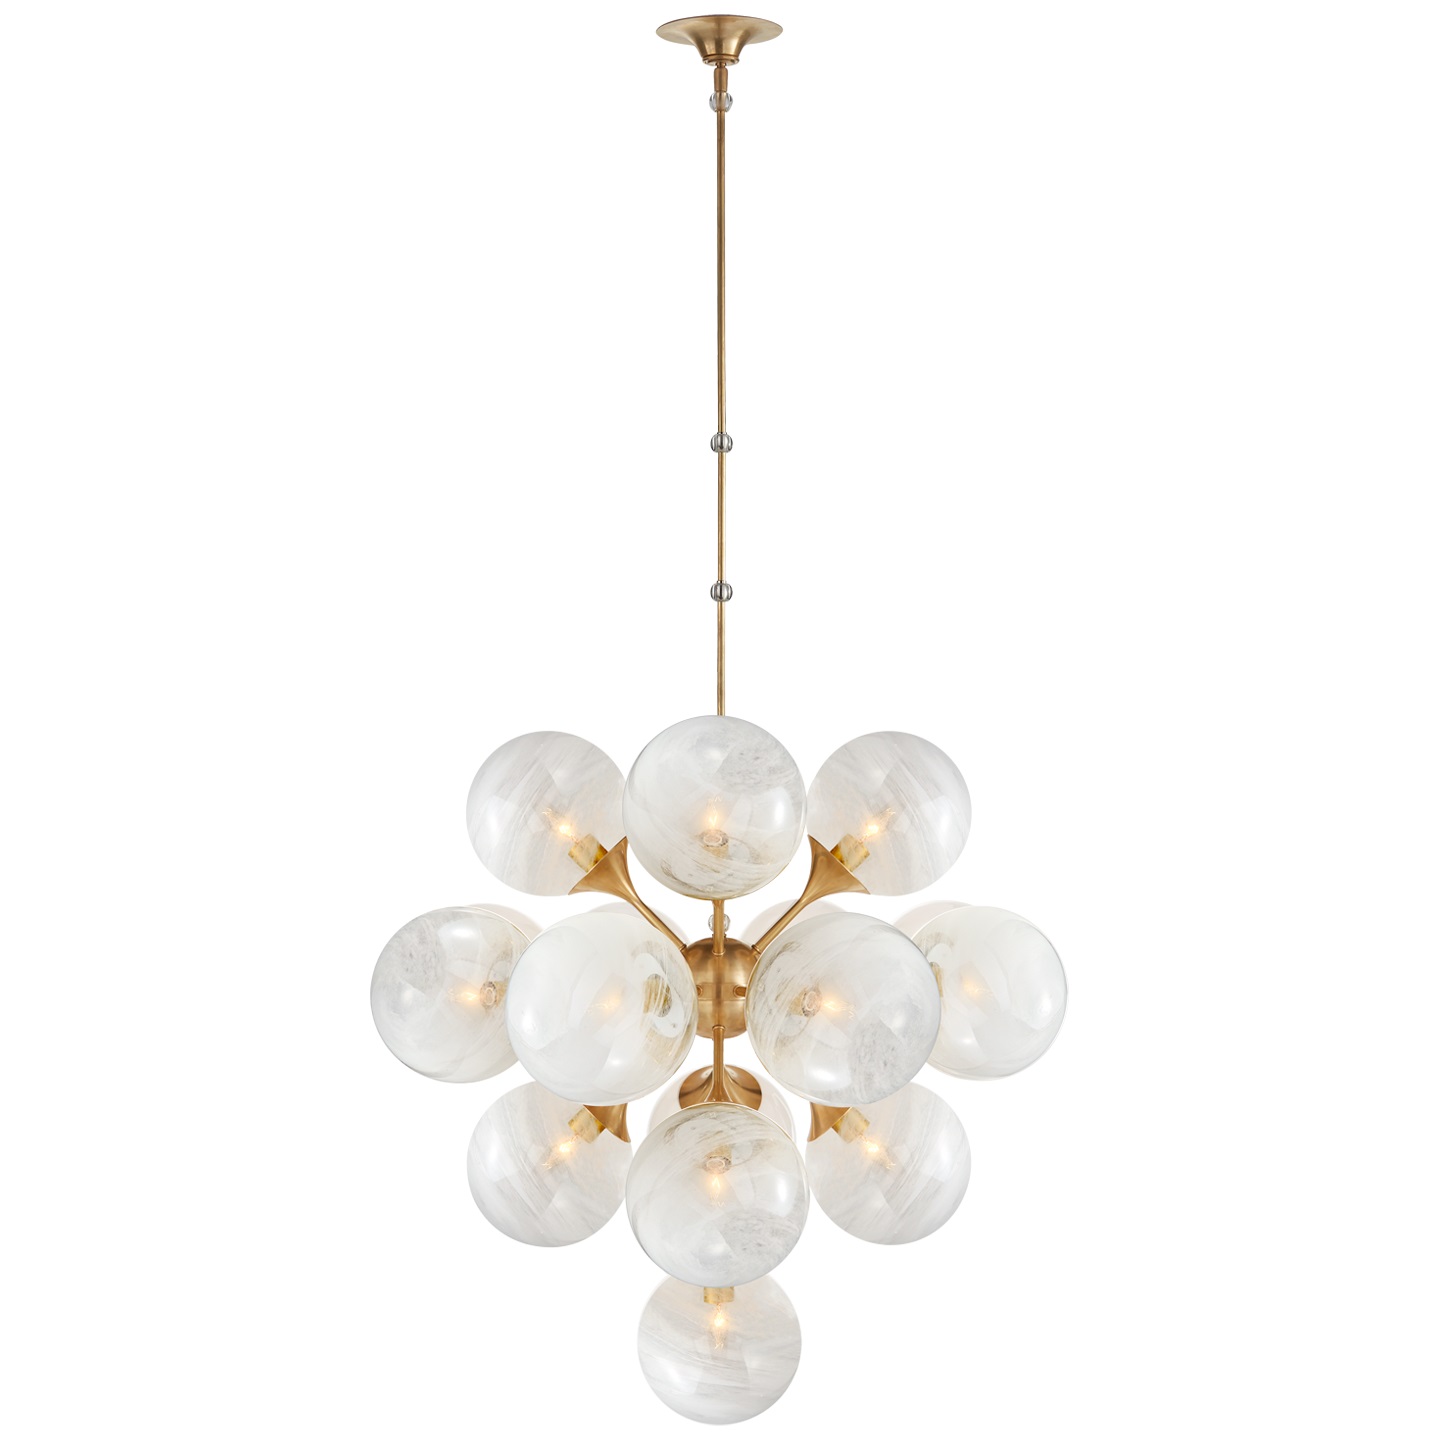 Cristol Large Tiered Chandelier